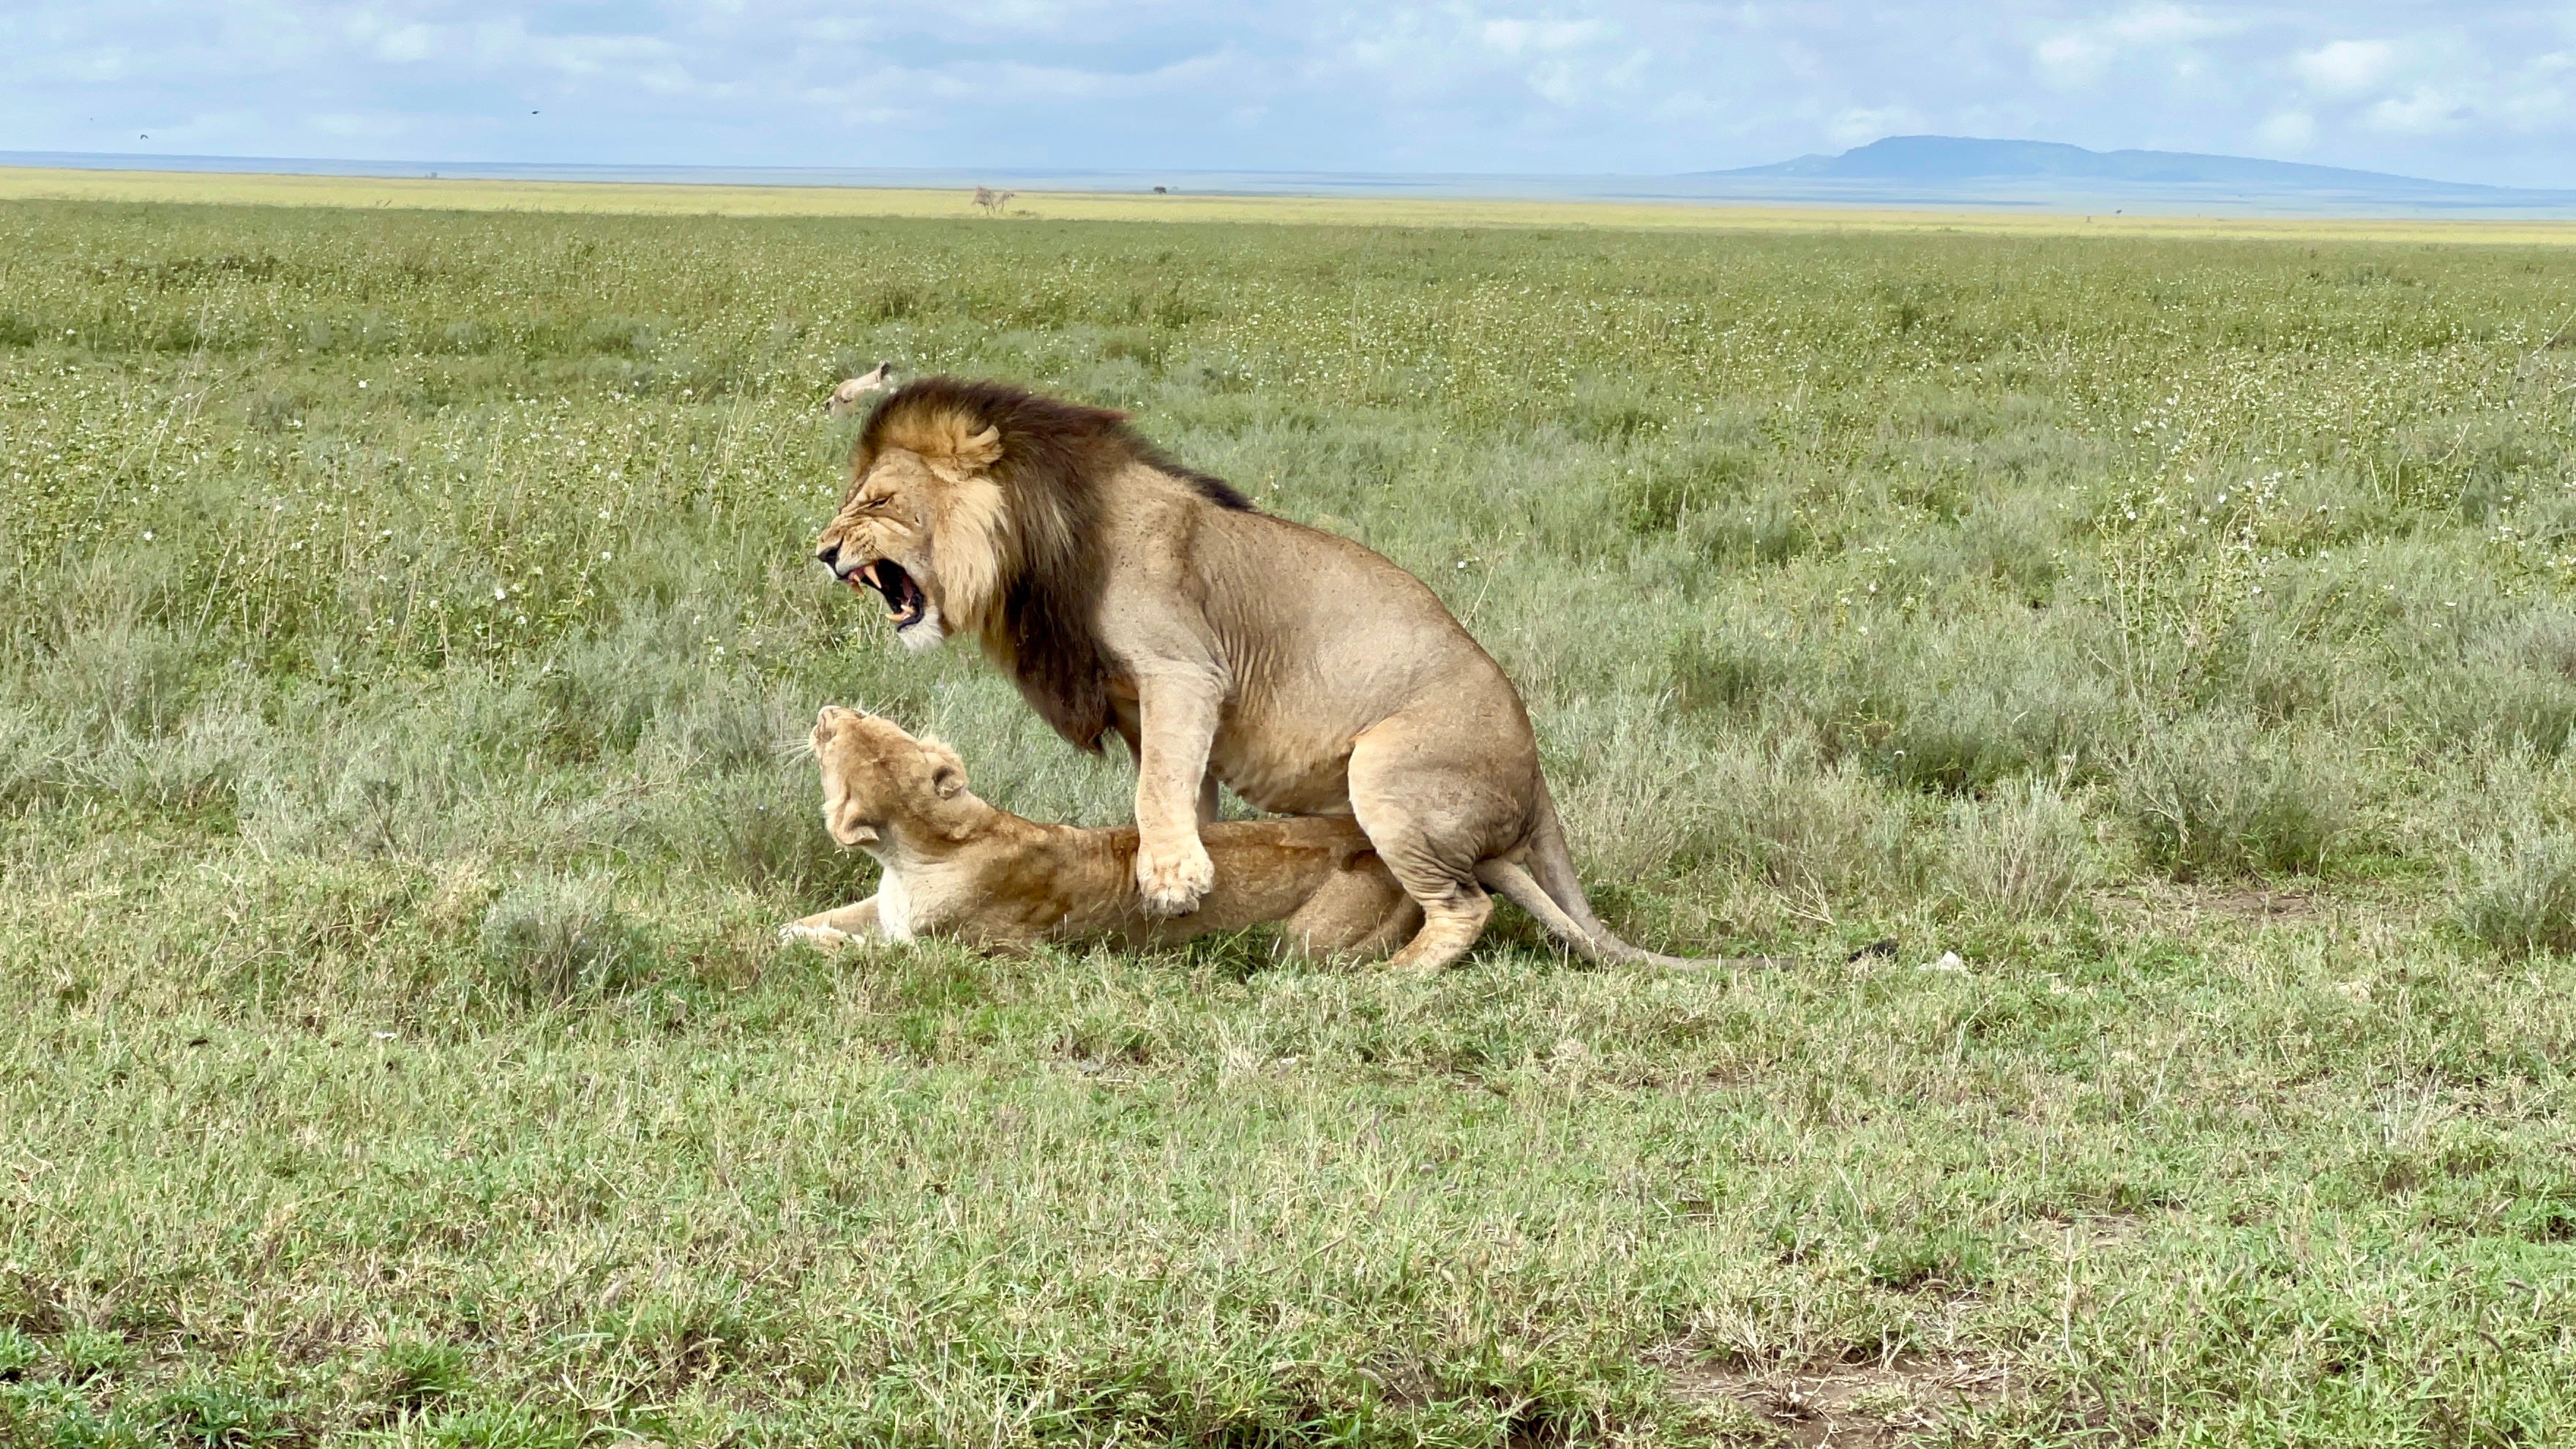 Kings Of The Jungle Sex - The shameless lions of Serengeti (Africa part 2)